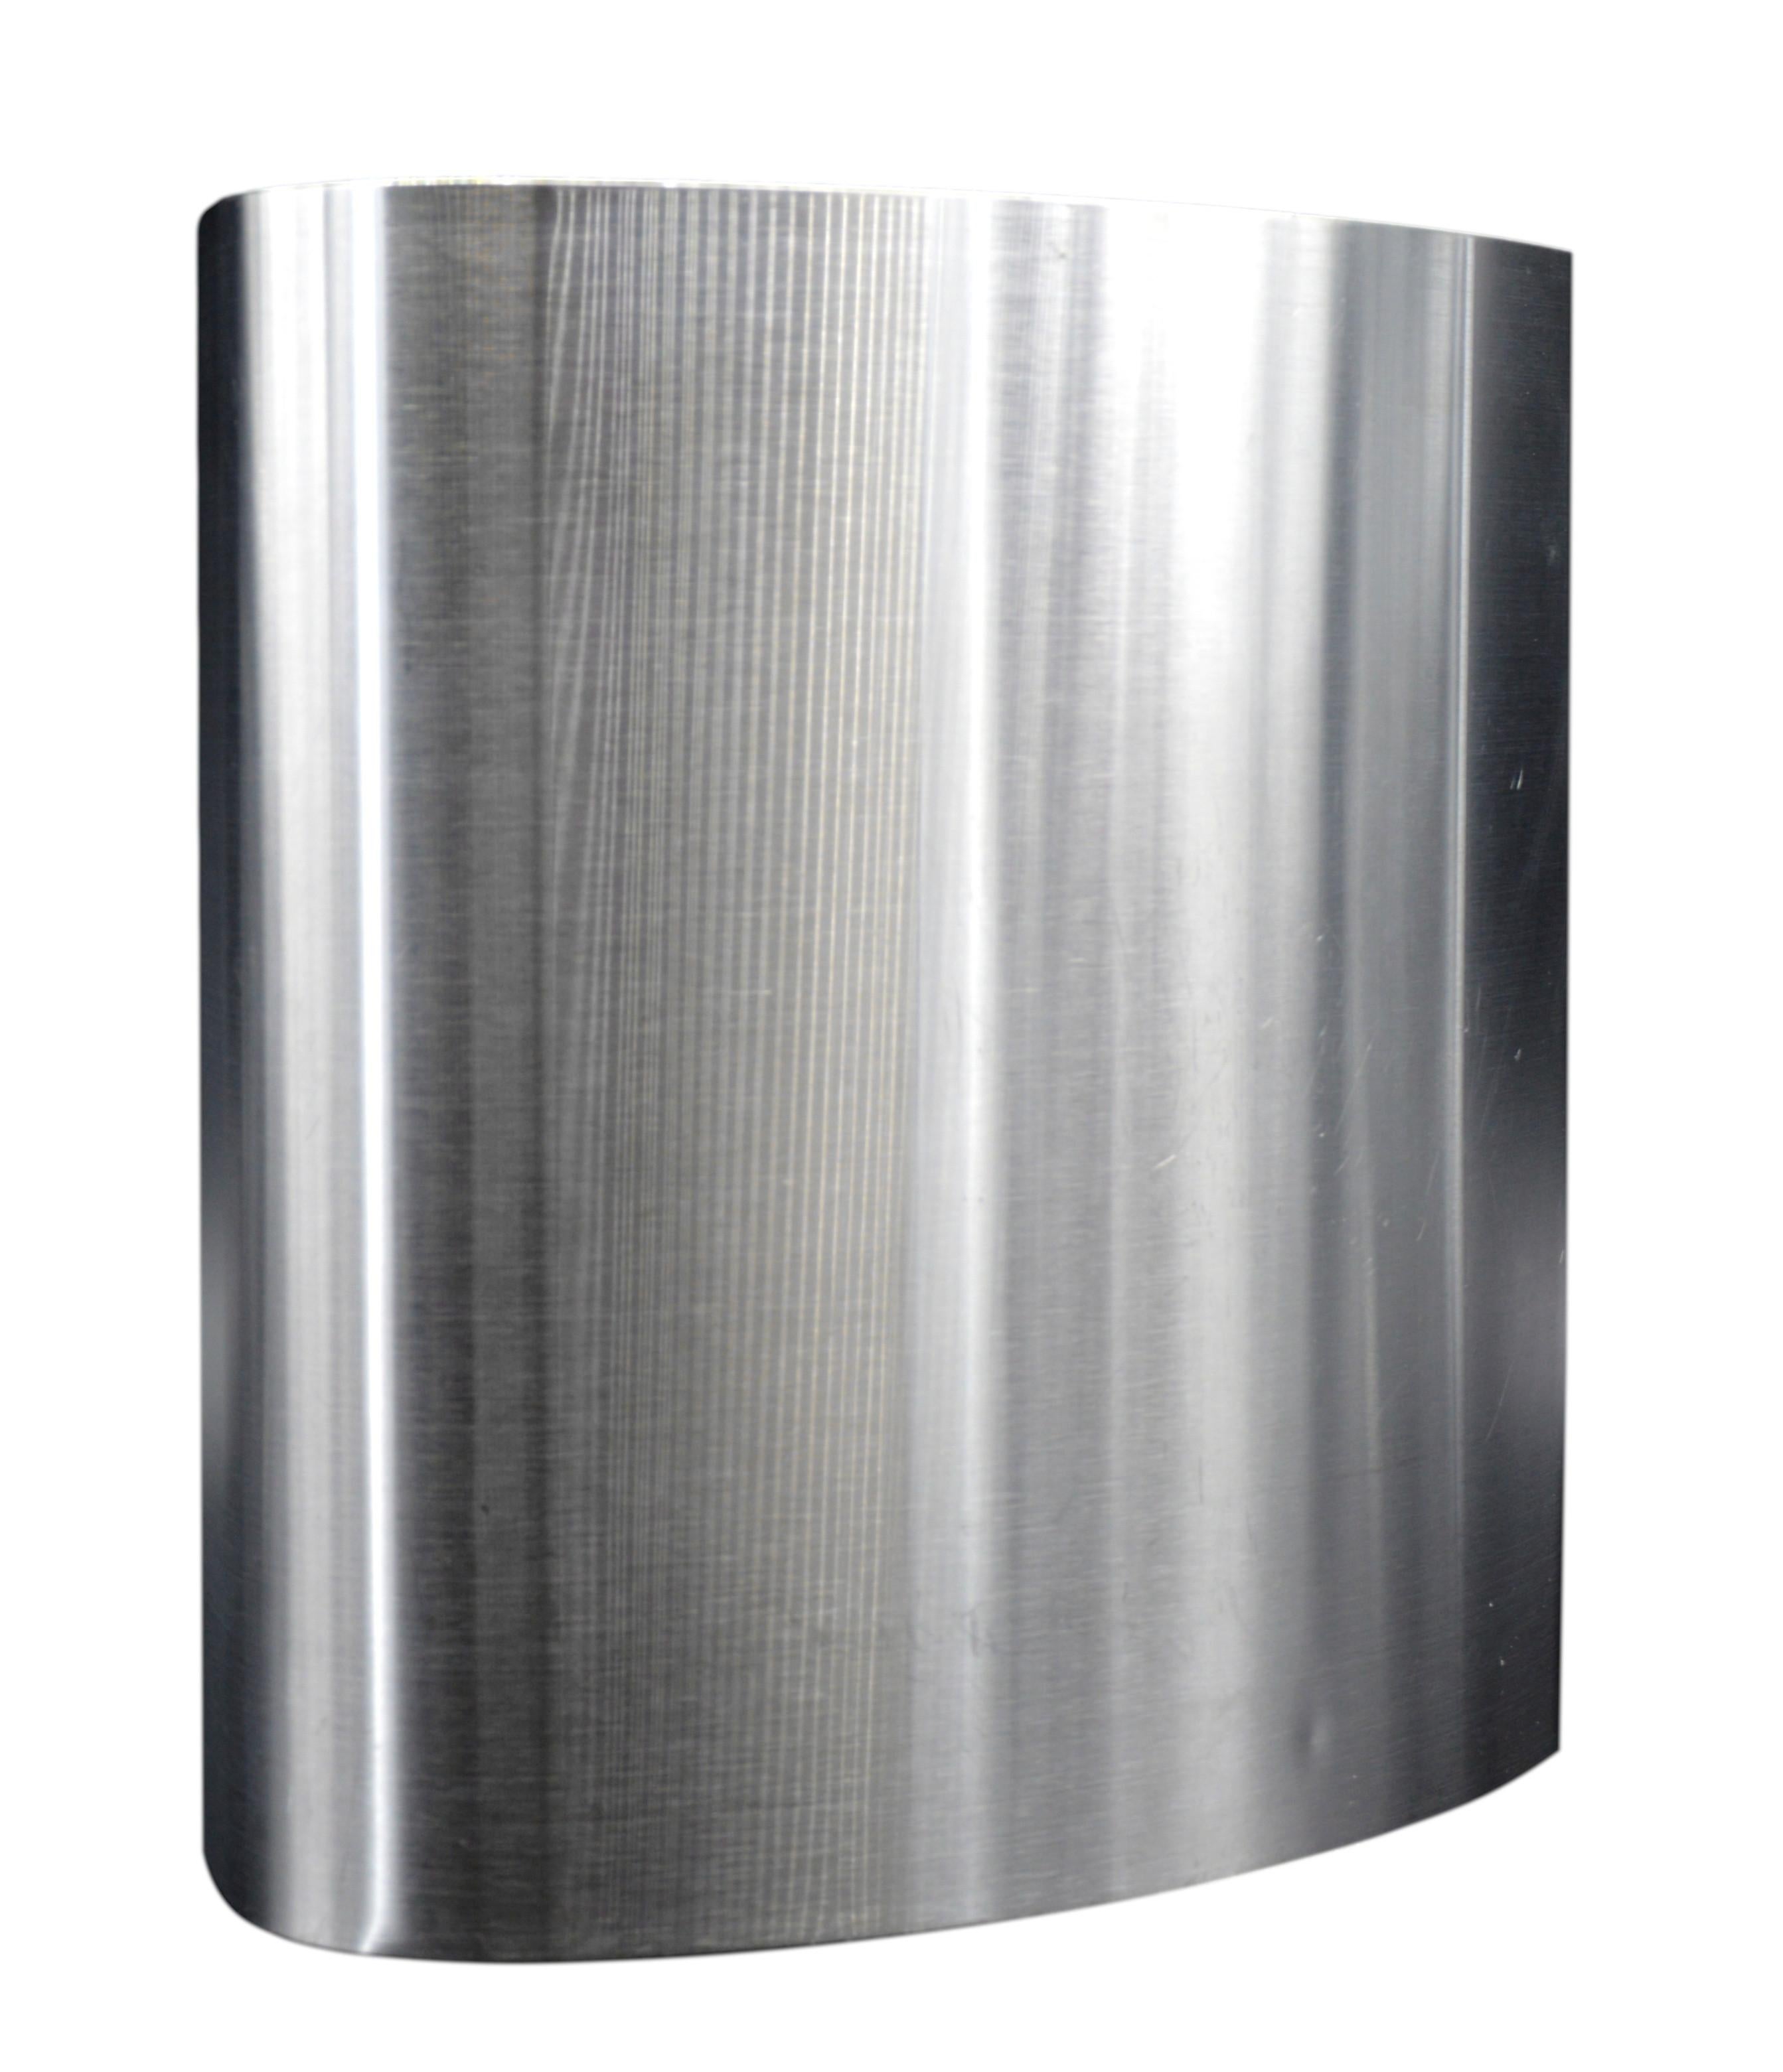 Mid-century paper bin by Xavier FEAL, France, ca.1970. Brushed stainless steel paper bin. Pinched toe with a ring opening for carrying it. Wooden bottom. Height : 11.8